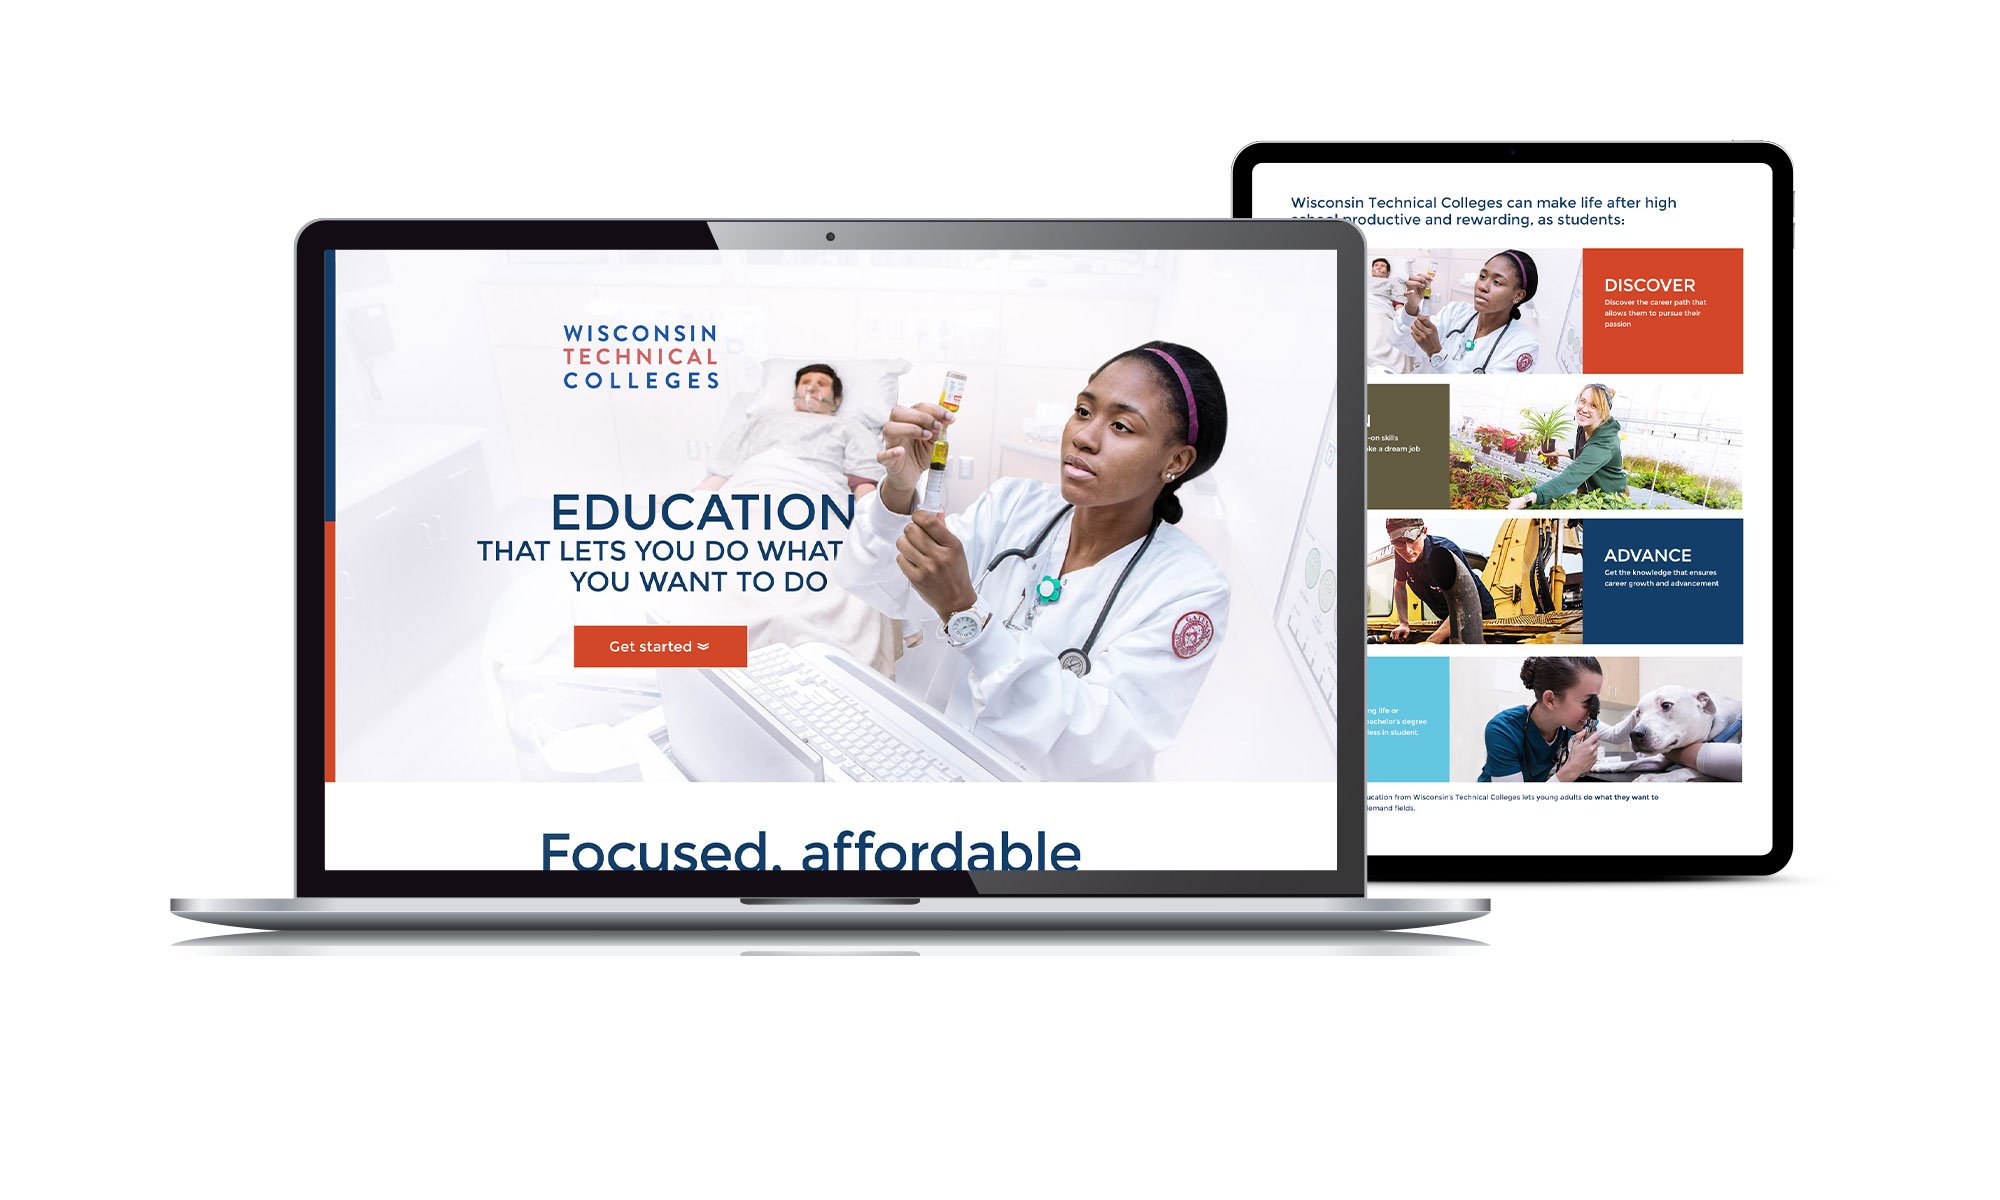 Pages from the Wisconsin Technical Colleges website displayed on laptop and tablet screens